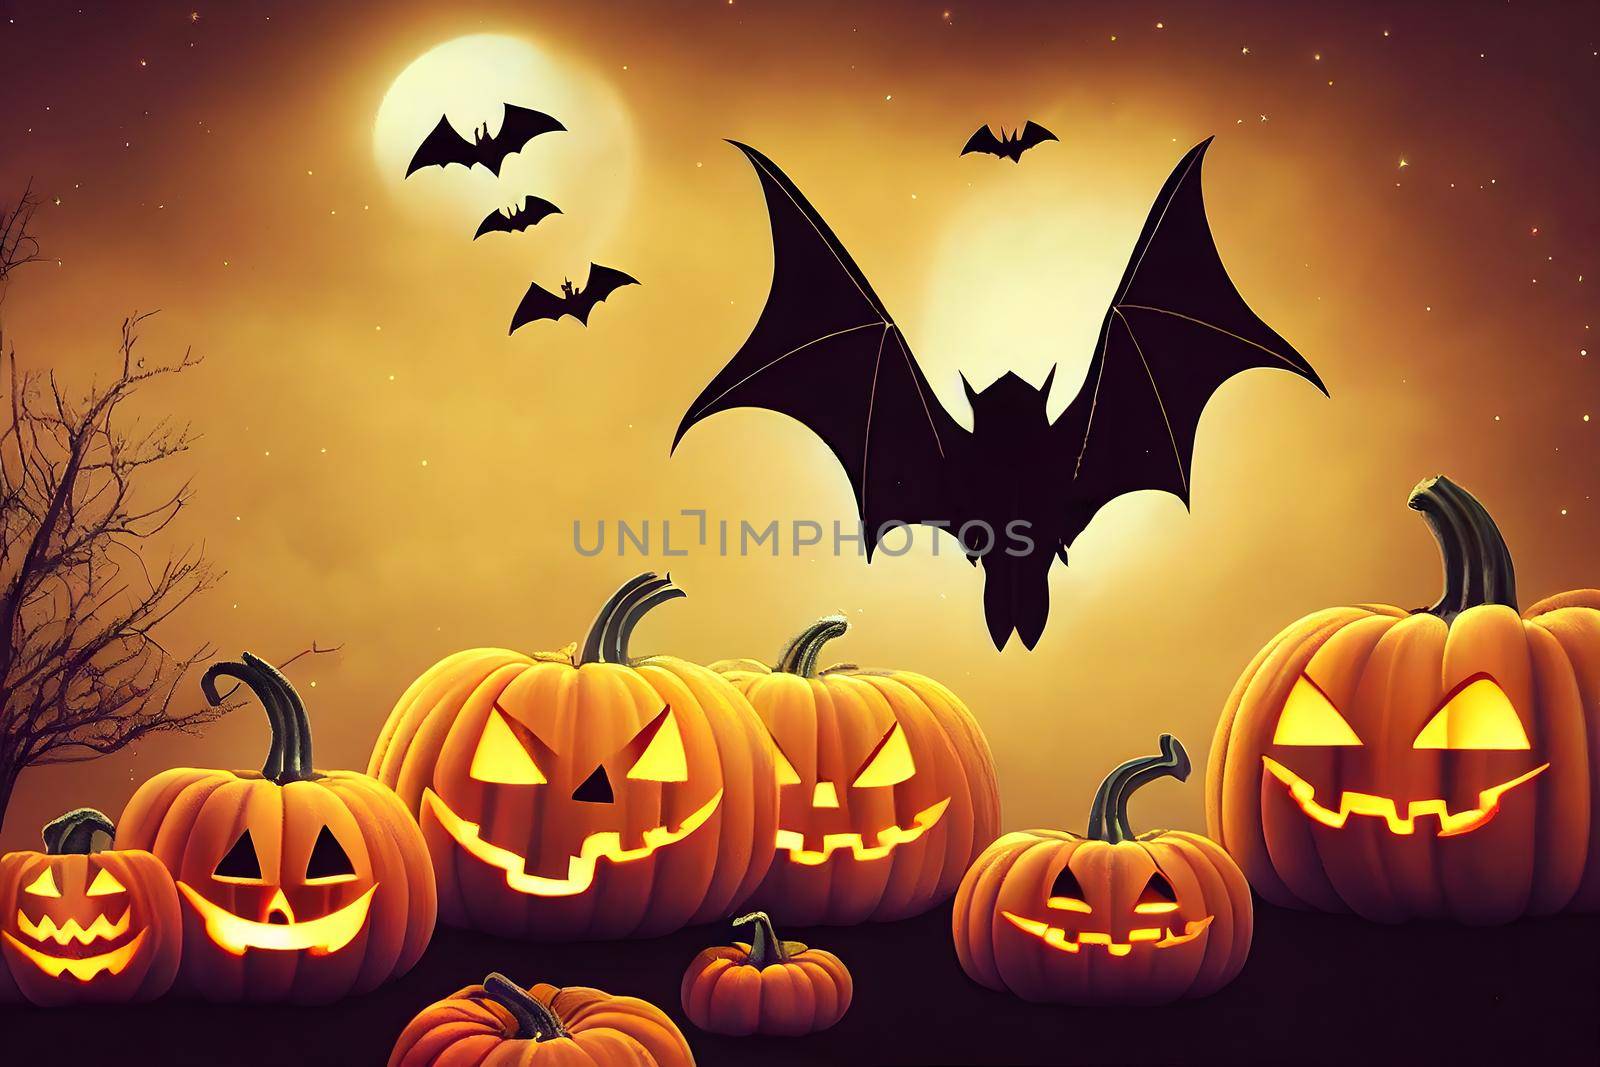 halloween background, bats, pumpkins, full moon and stars at night, neural network generated art. Digitally generated image. Not based on any actual scene or pattern.